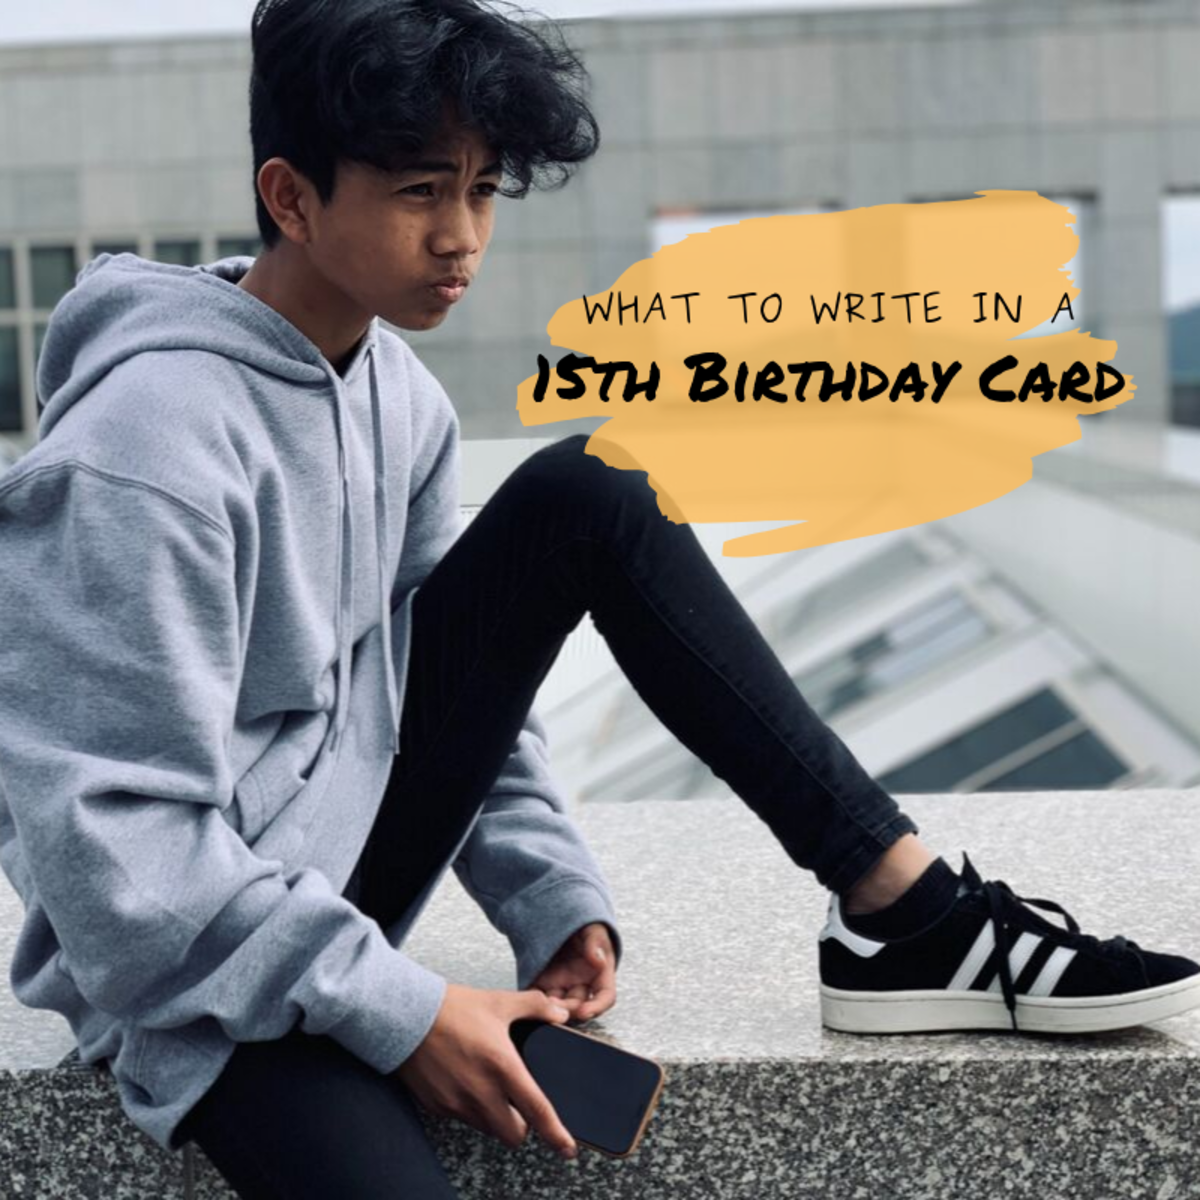 15th Birthday Card Wishes, Messages, Jokes, and Poems